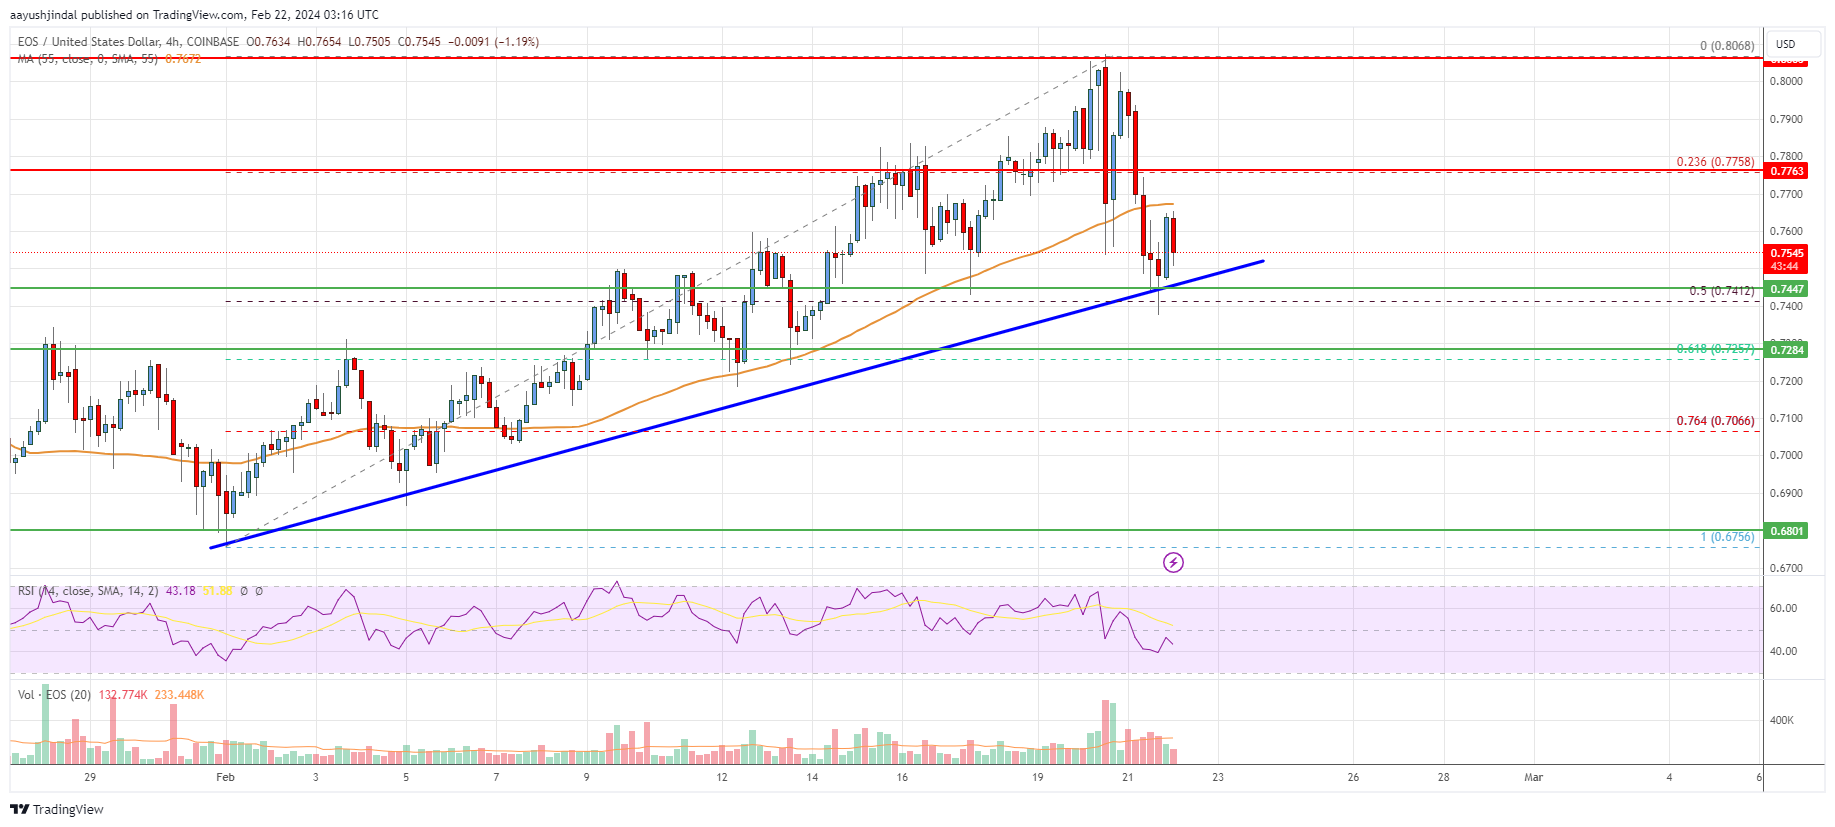 EOS Price Analysis: Bulls Protect Key Uptrend Support